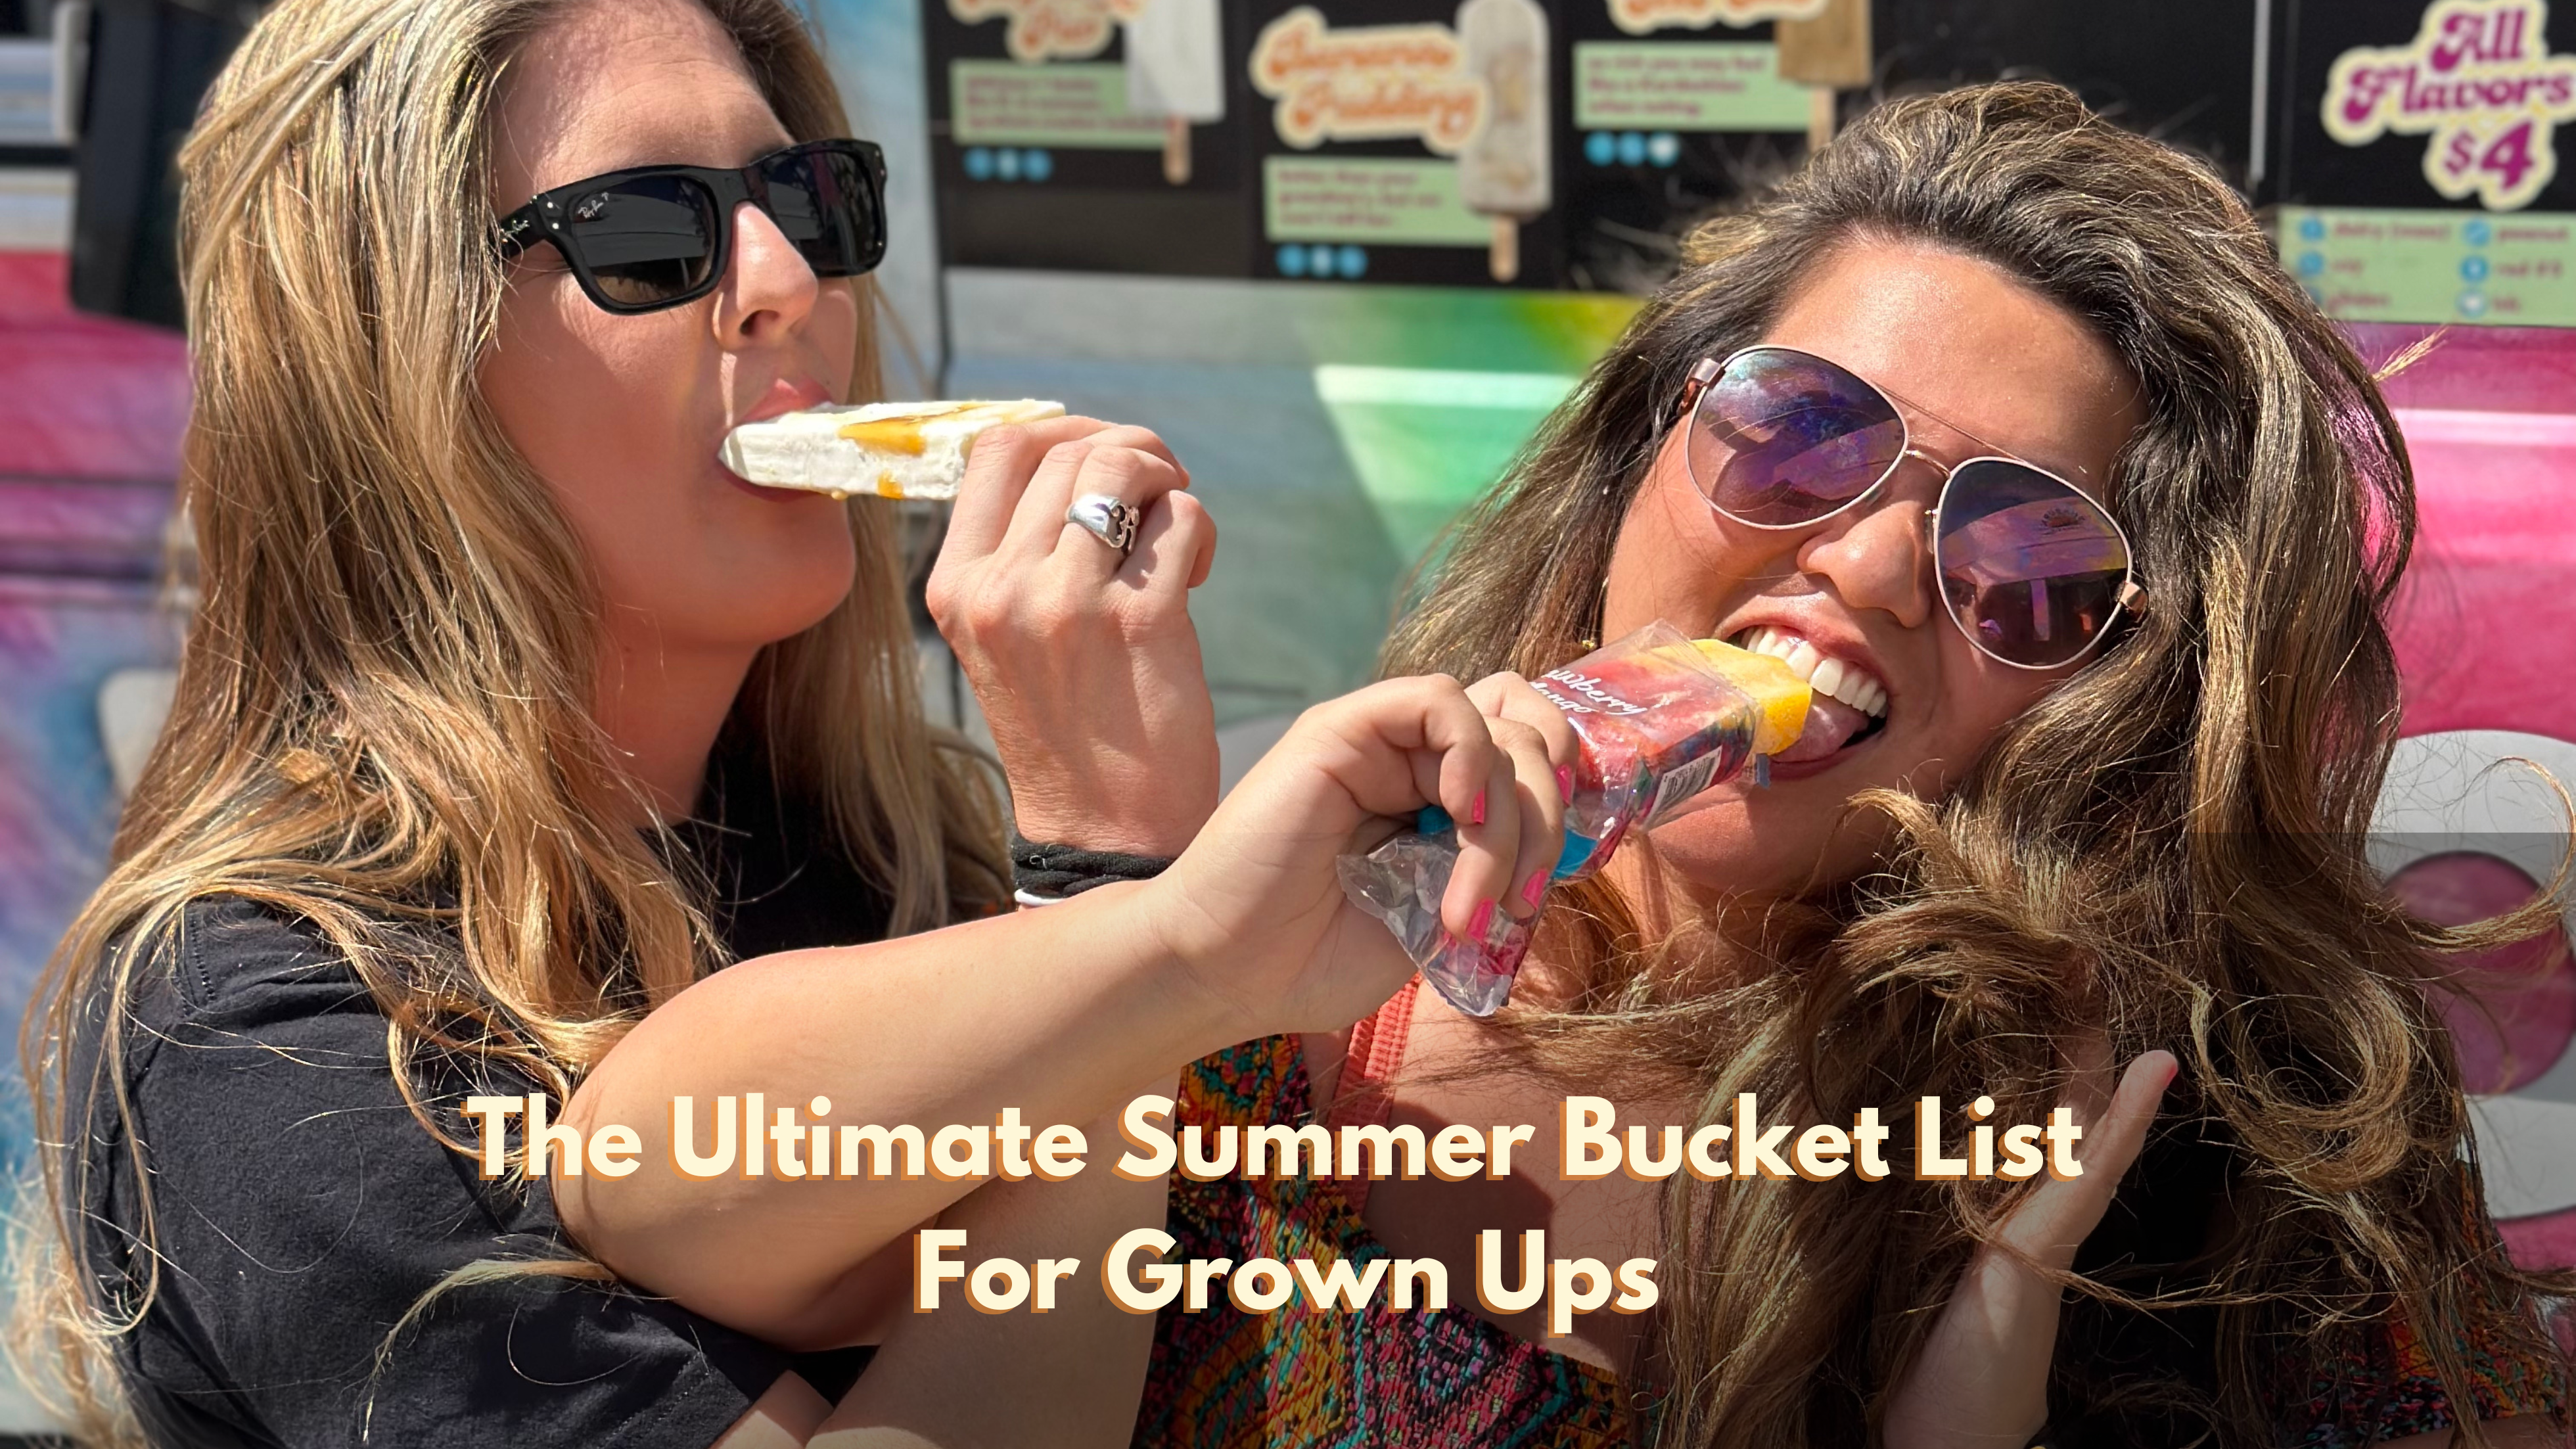 The Ultimate Summer Bucket List For Grown Ups